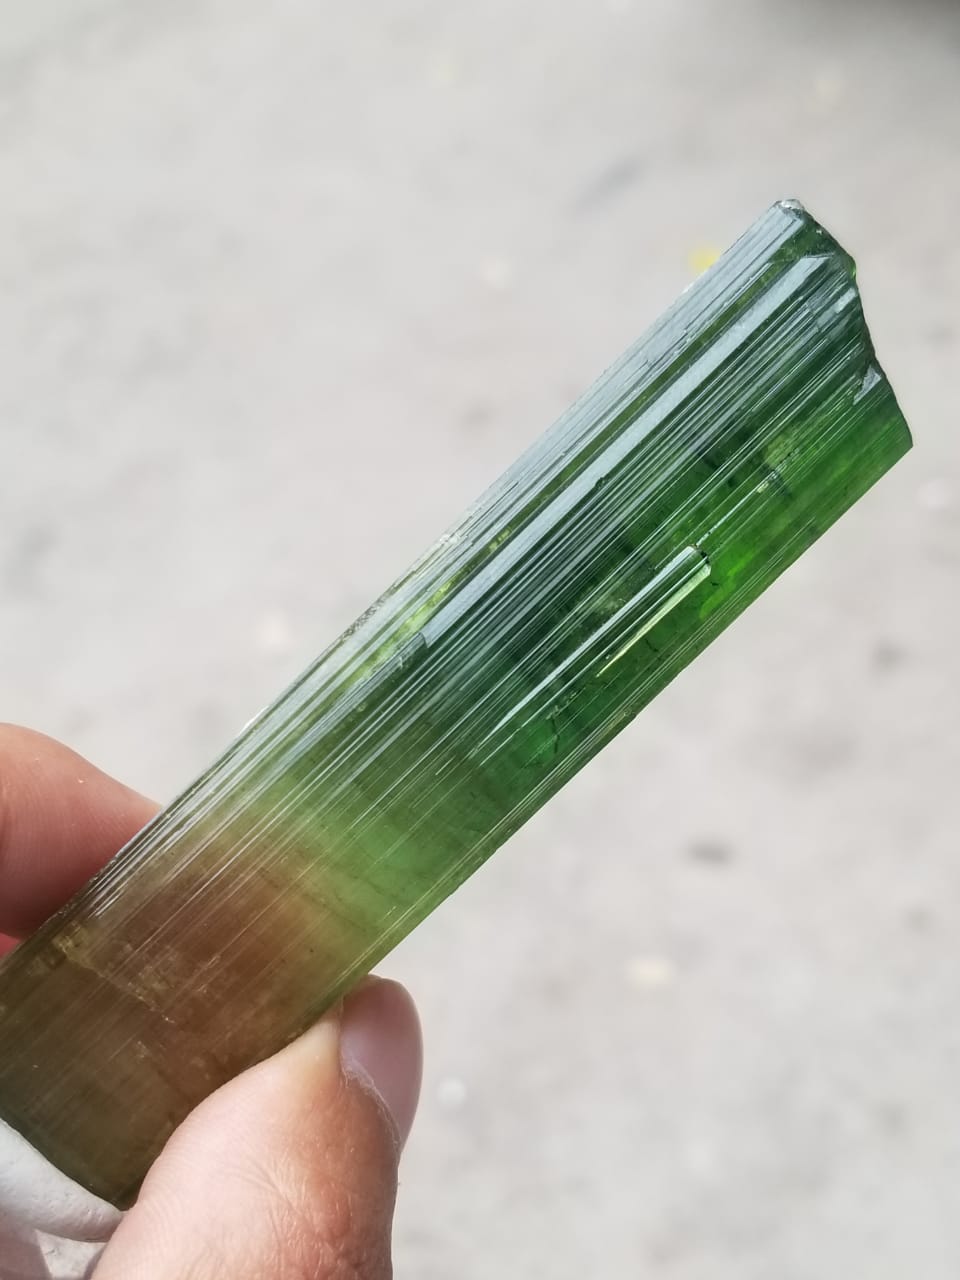 Bicolor Natural Terminated Tourmaline crystal available for sale